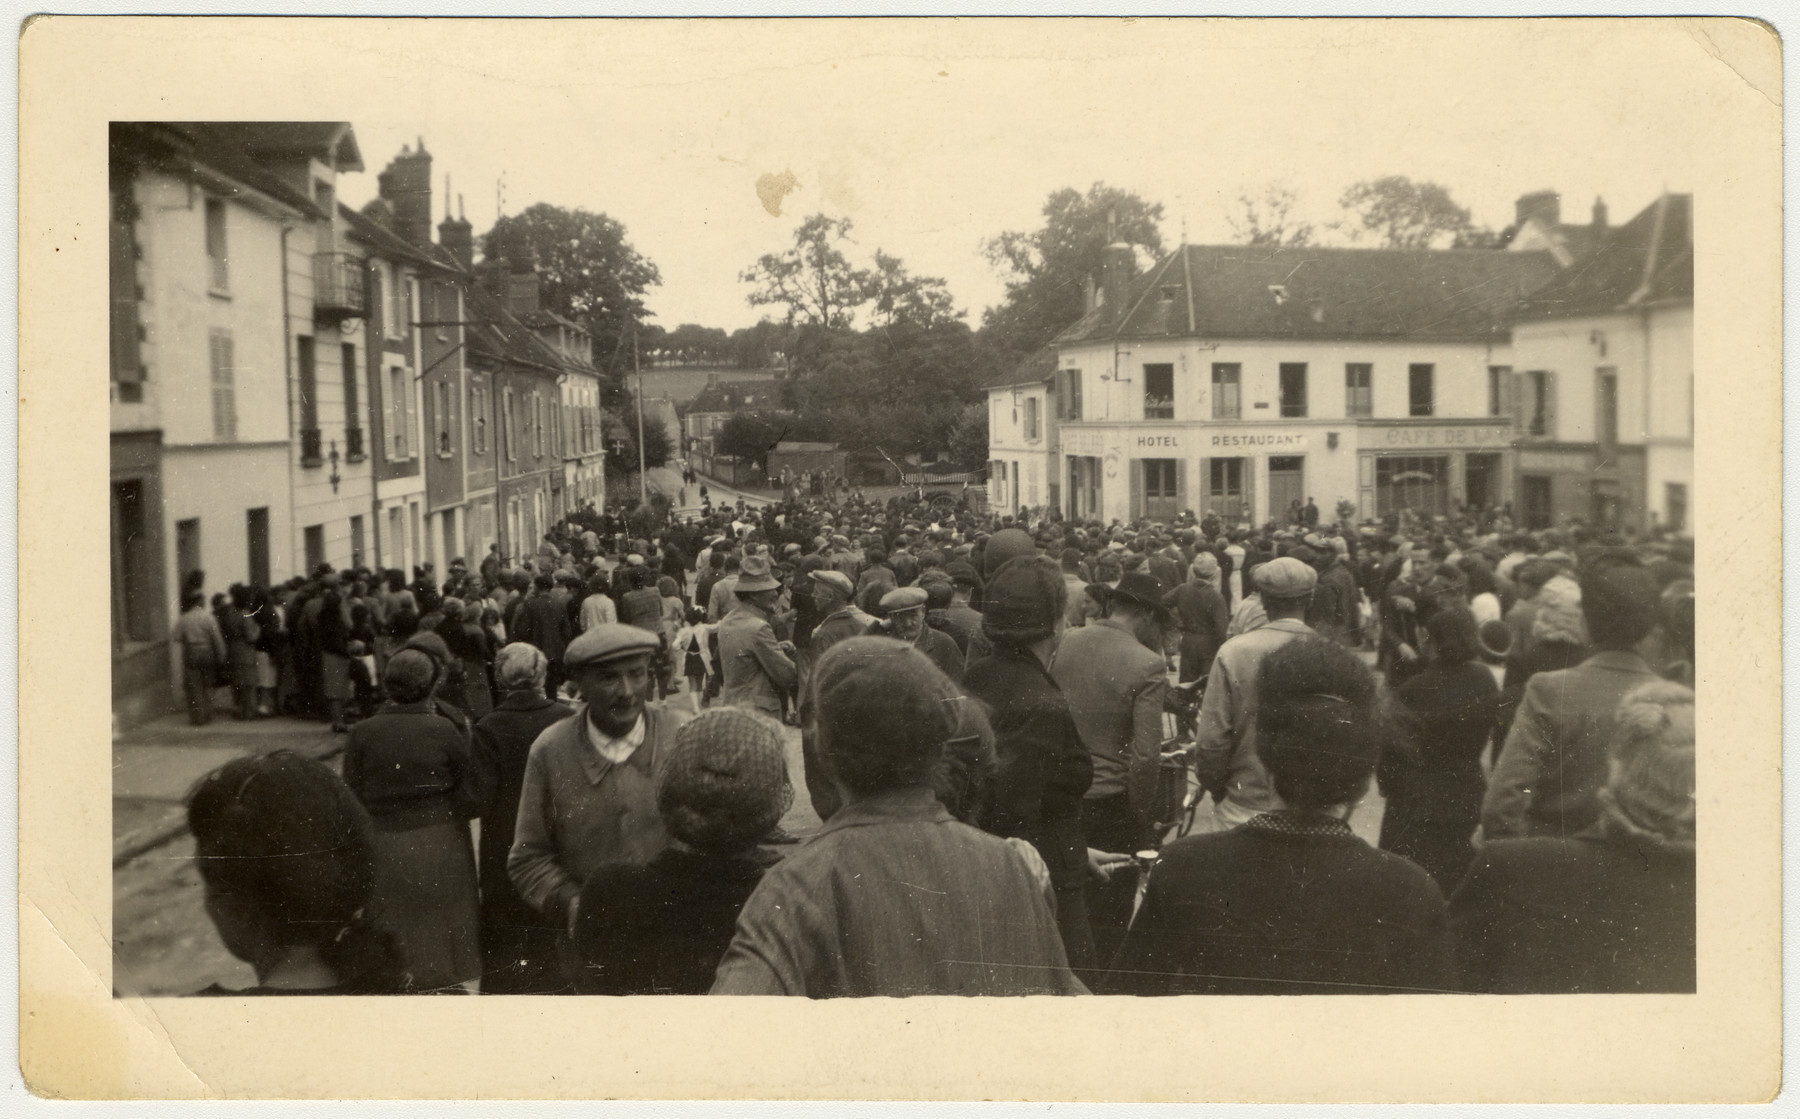 A large crowd gathers to watch French women accused of collaboration have their heads shaved.

The original caption reads: "The crowd that gathered to see the German collaborators get their hair shaved off.  Taken in France."